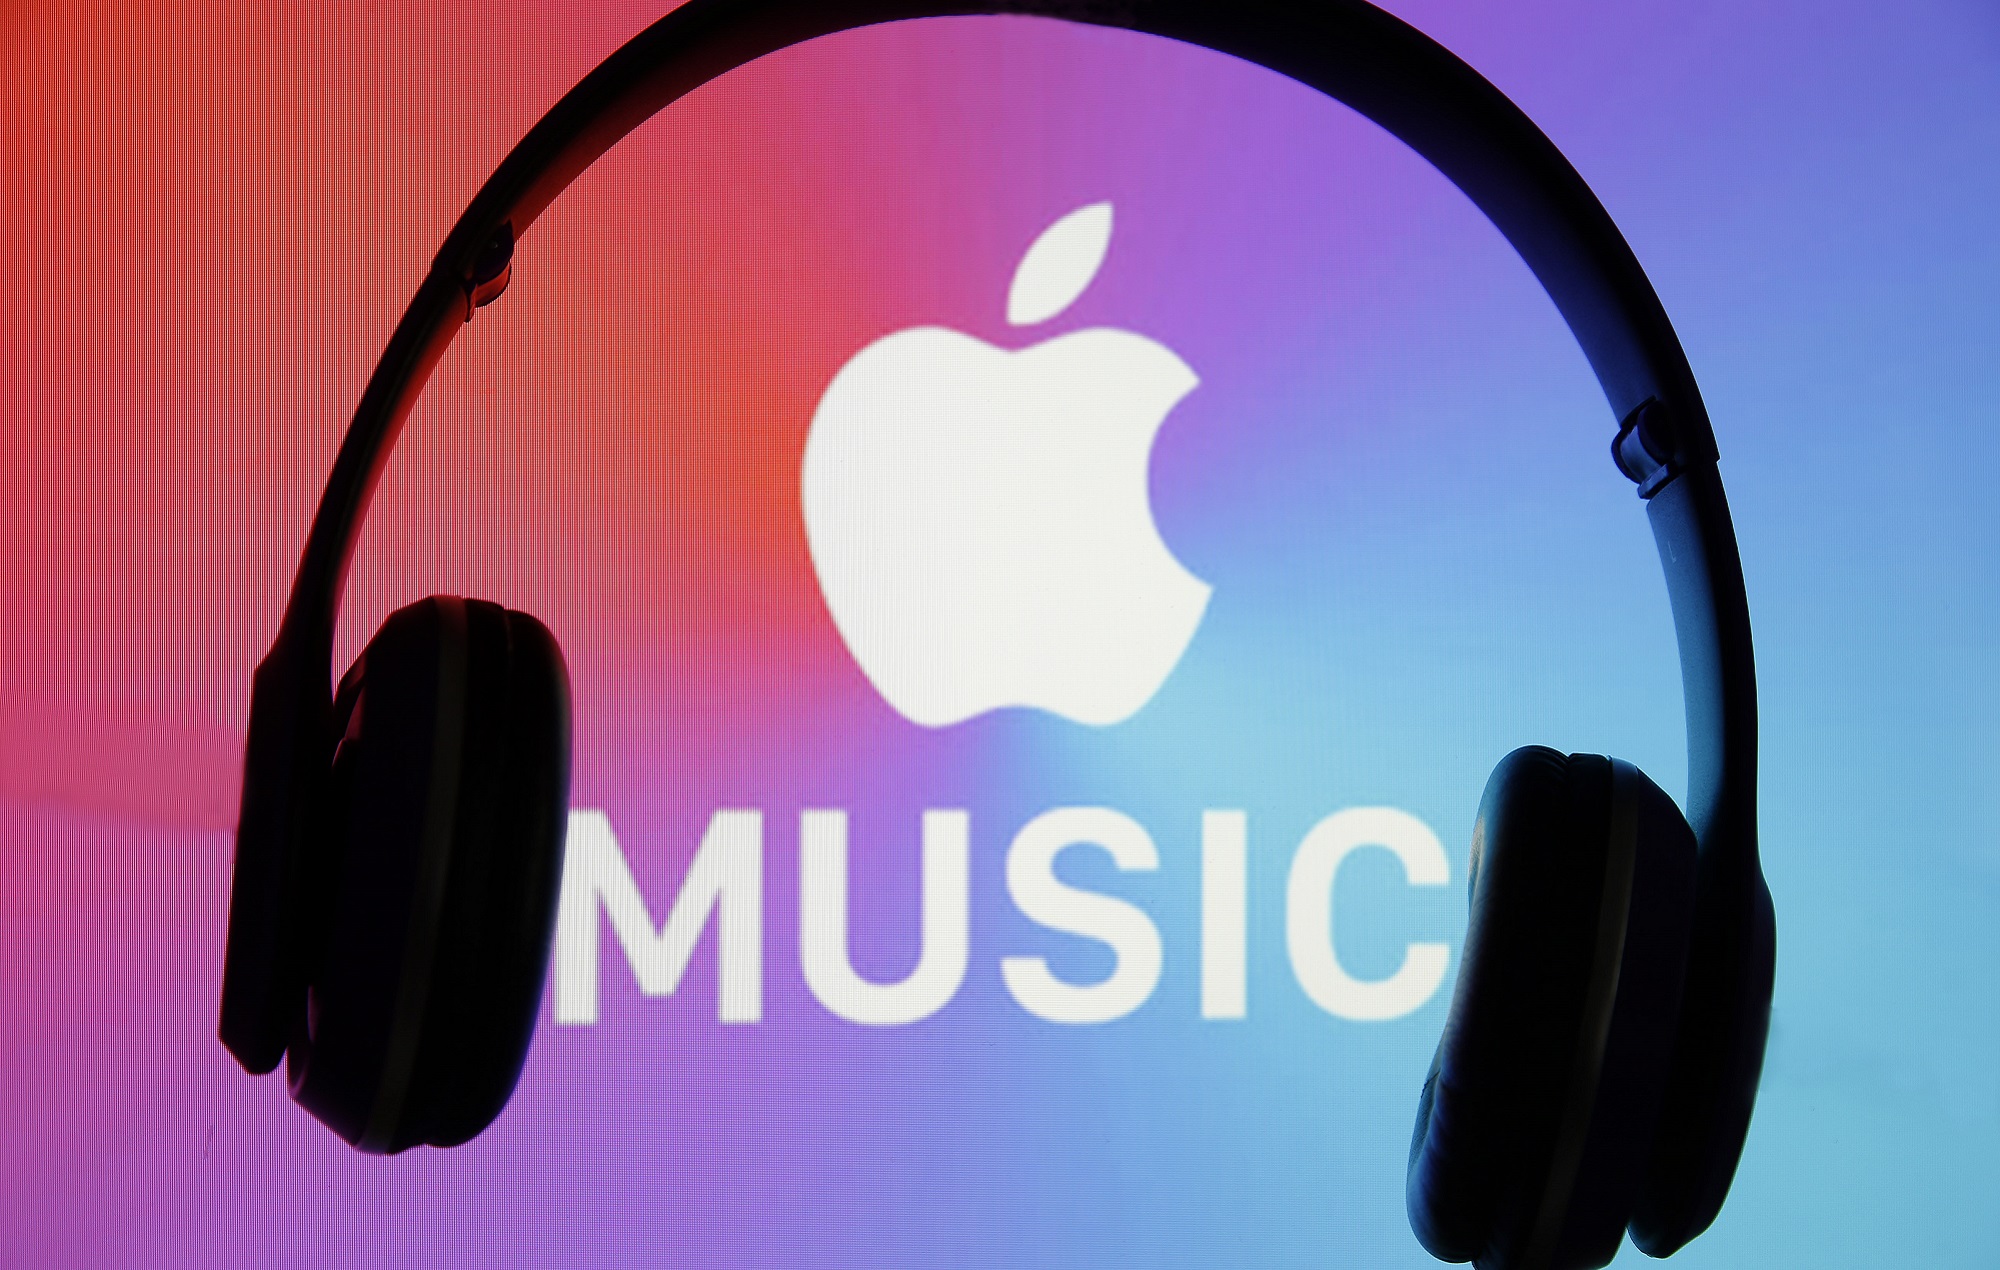 Opening Apple Music to See If the Format Problem Happens